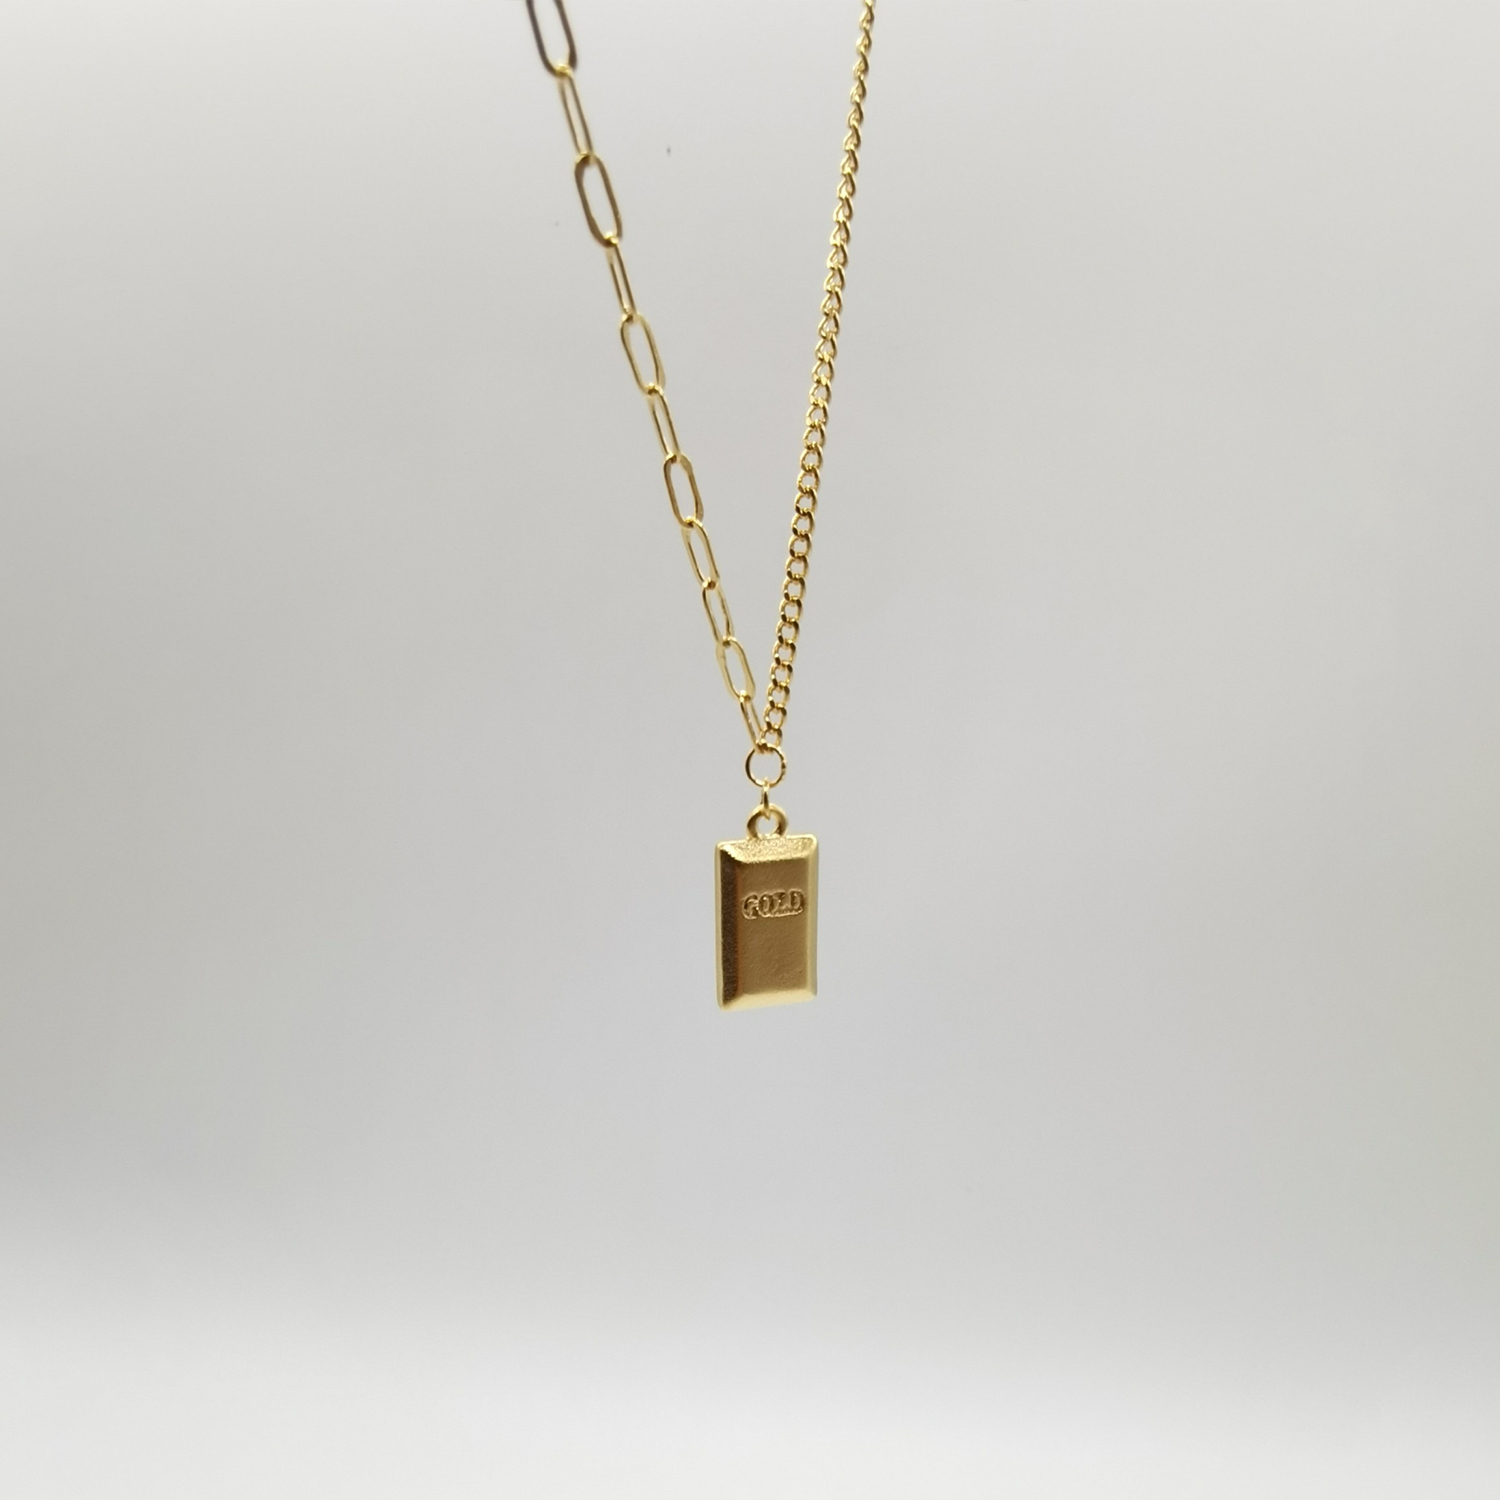 Alluvial gold vacuum electroplating 24K gold small gold bar necklace